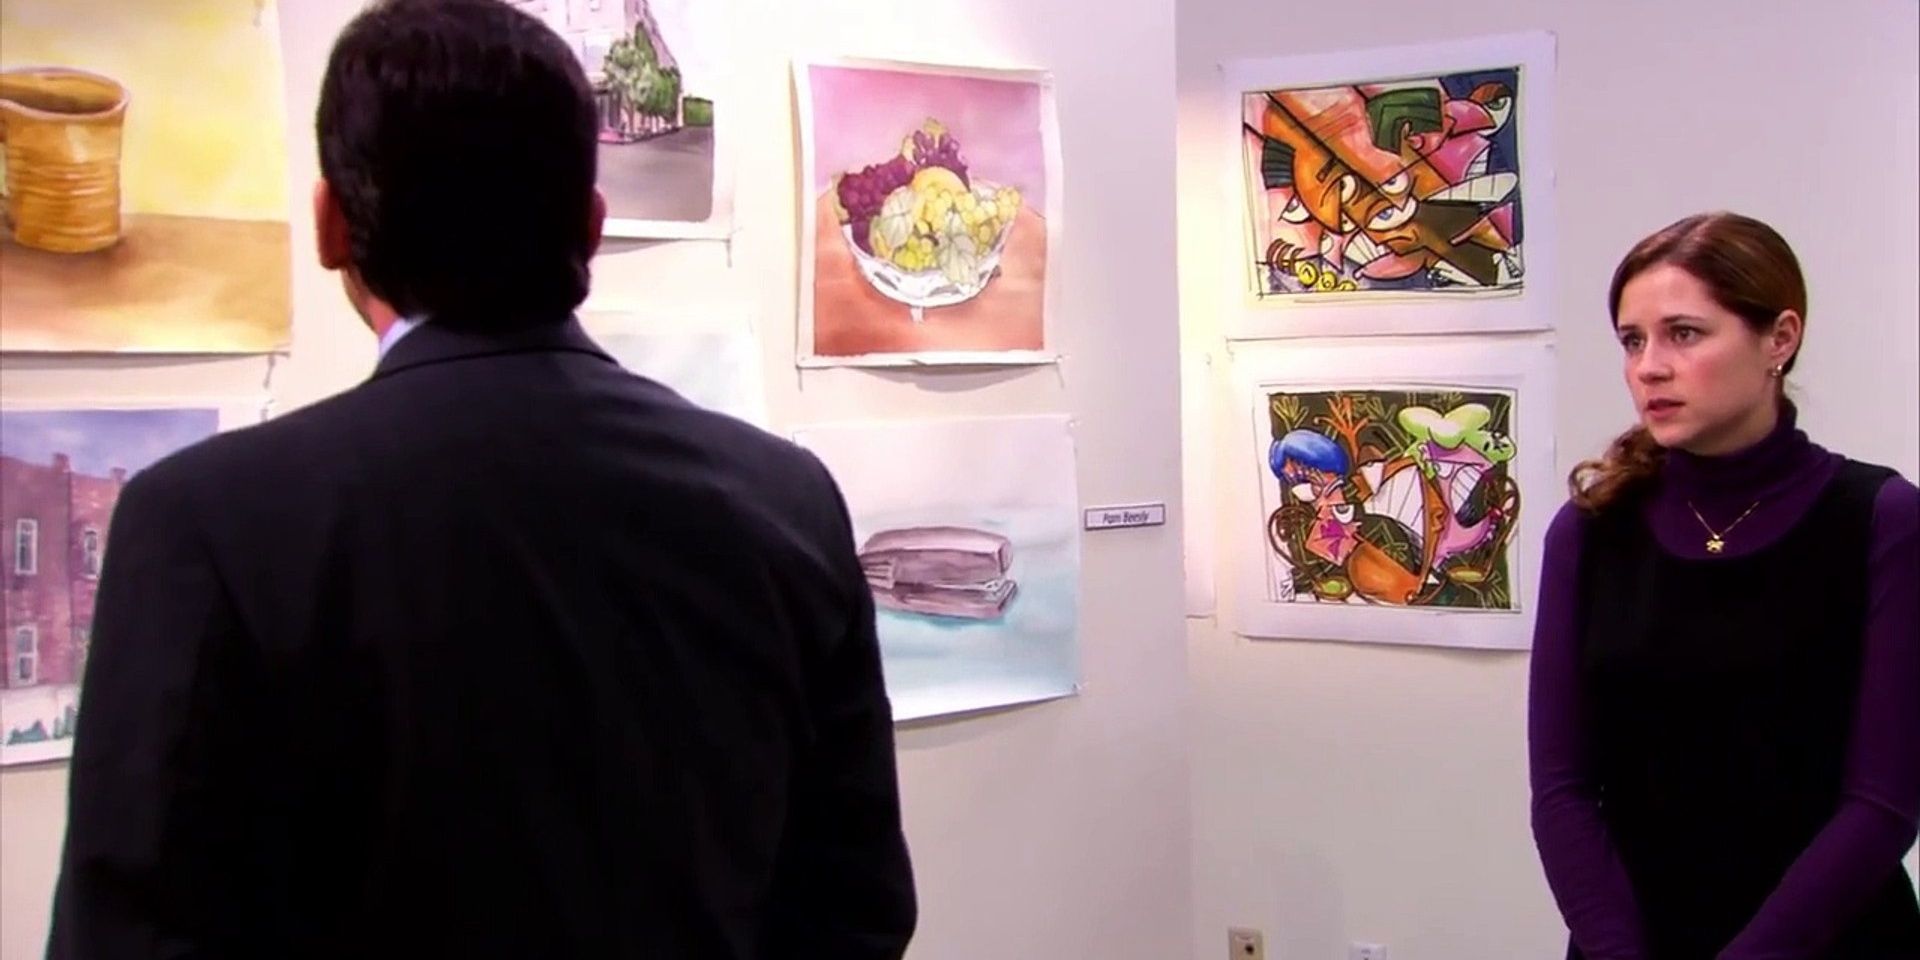 Michael looks at Pam's art as she watches him on The Office.